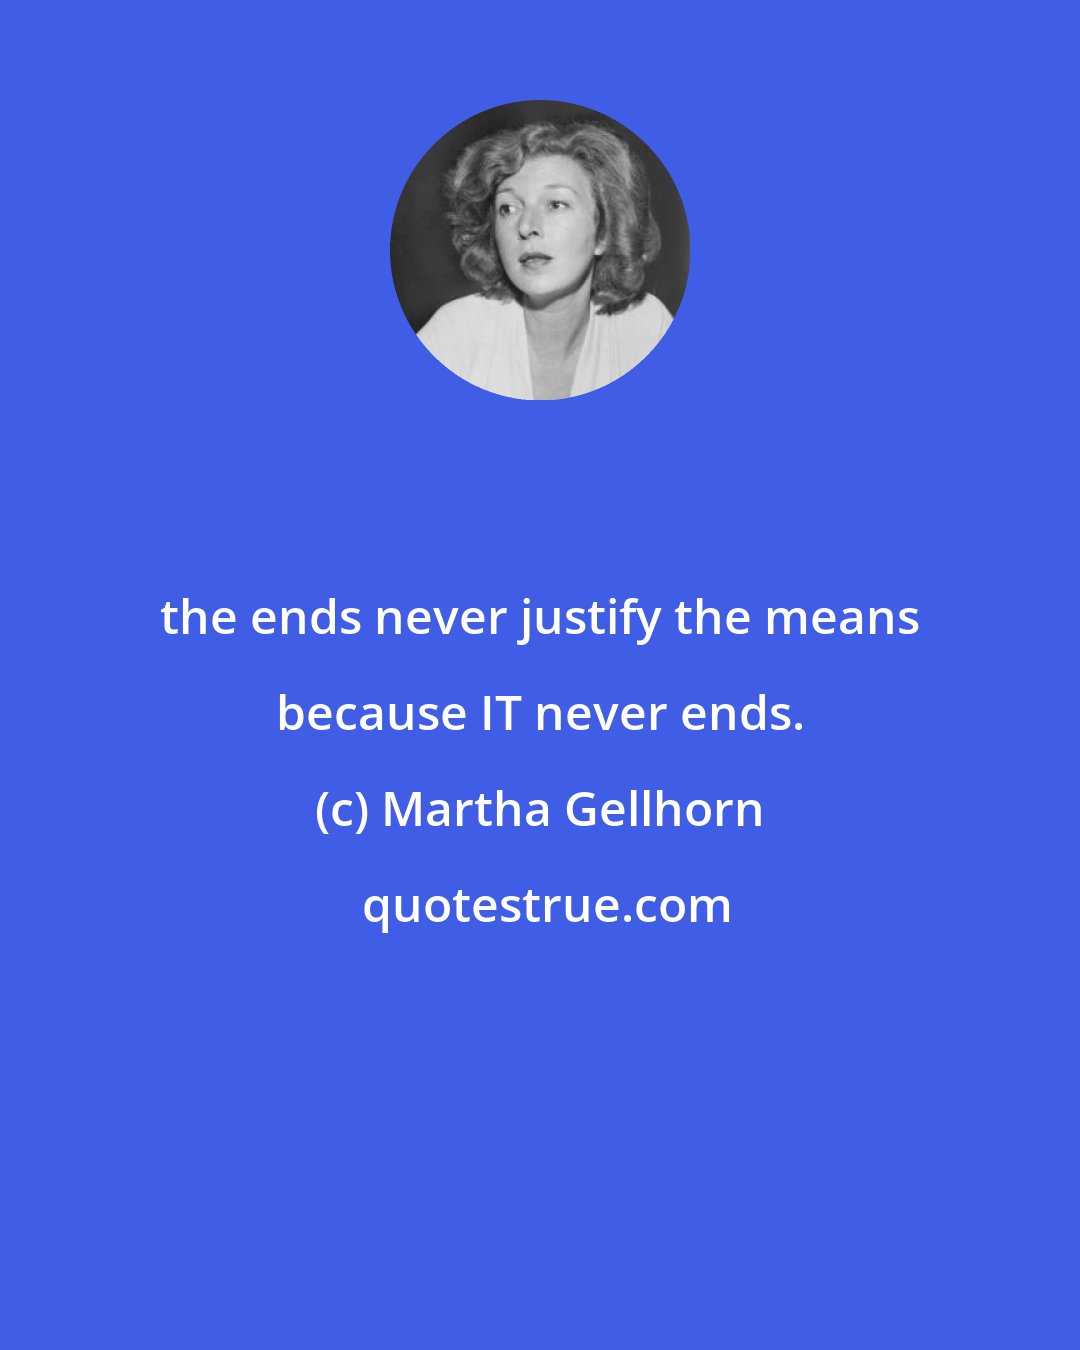 Martha Gellhorn: the ends never justify the means because IT never ends.